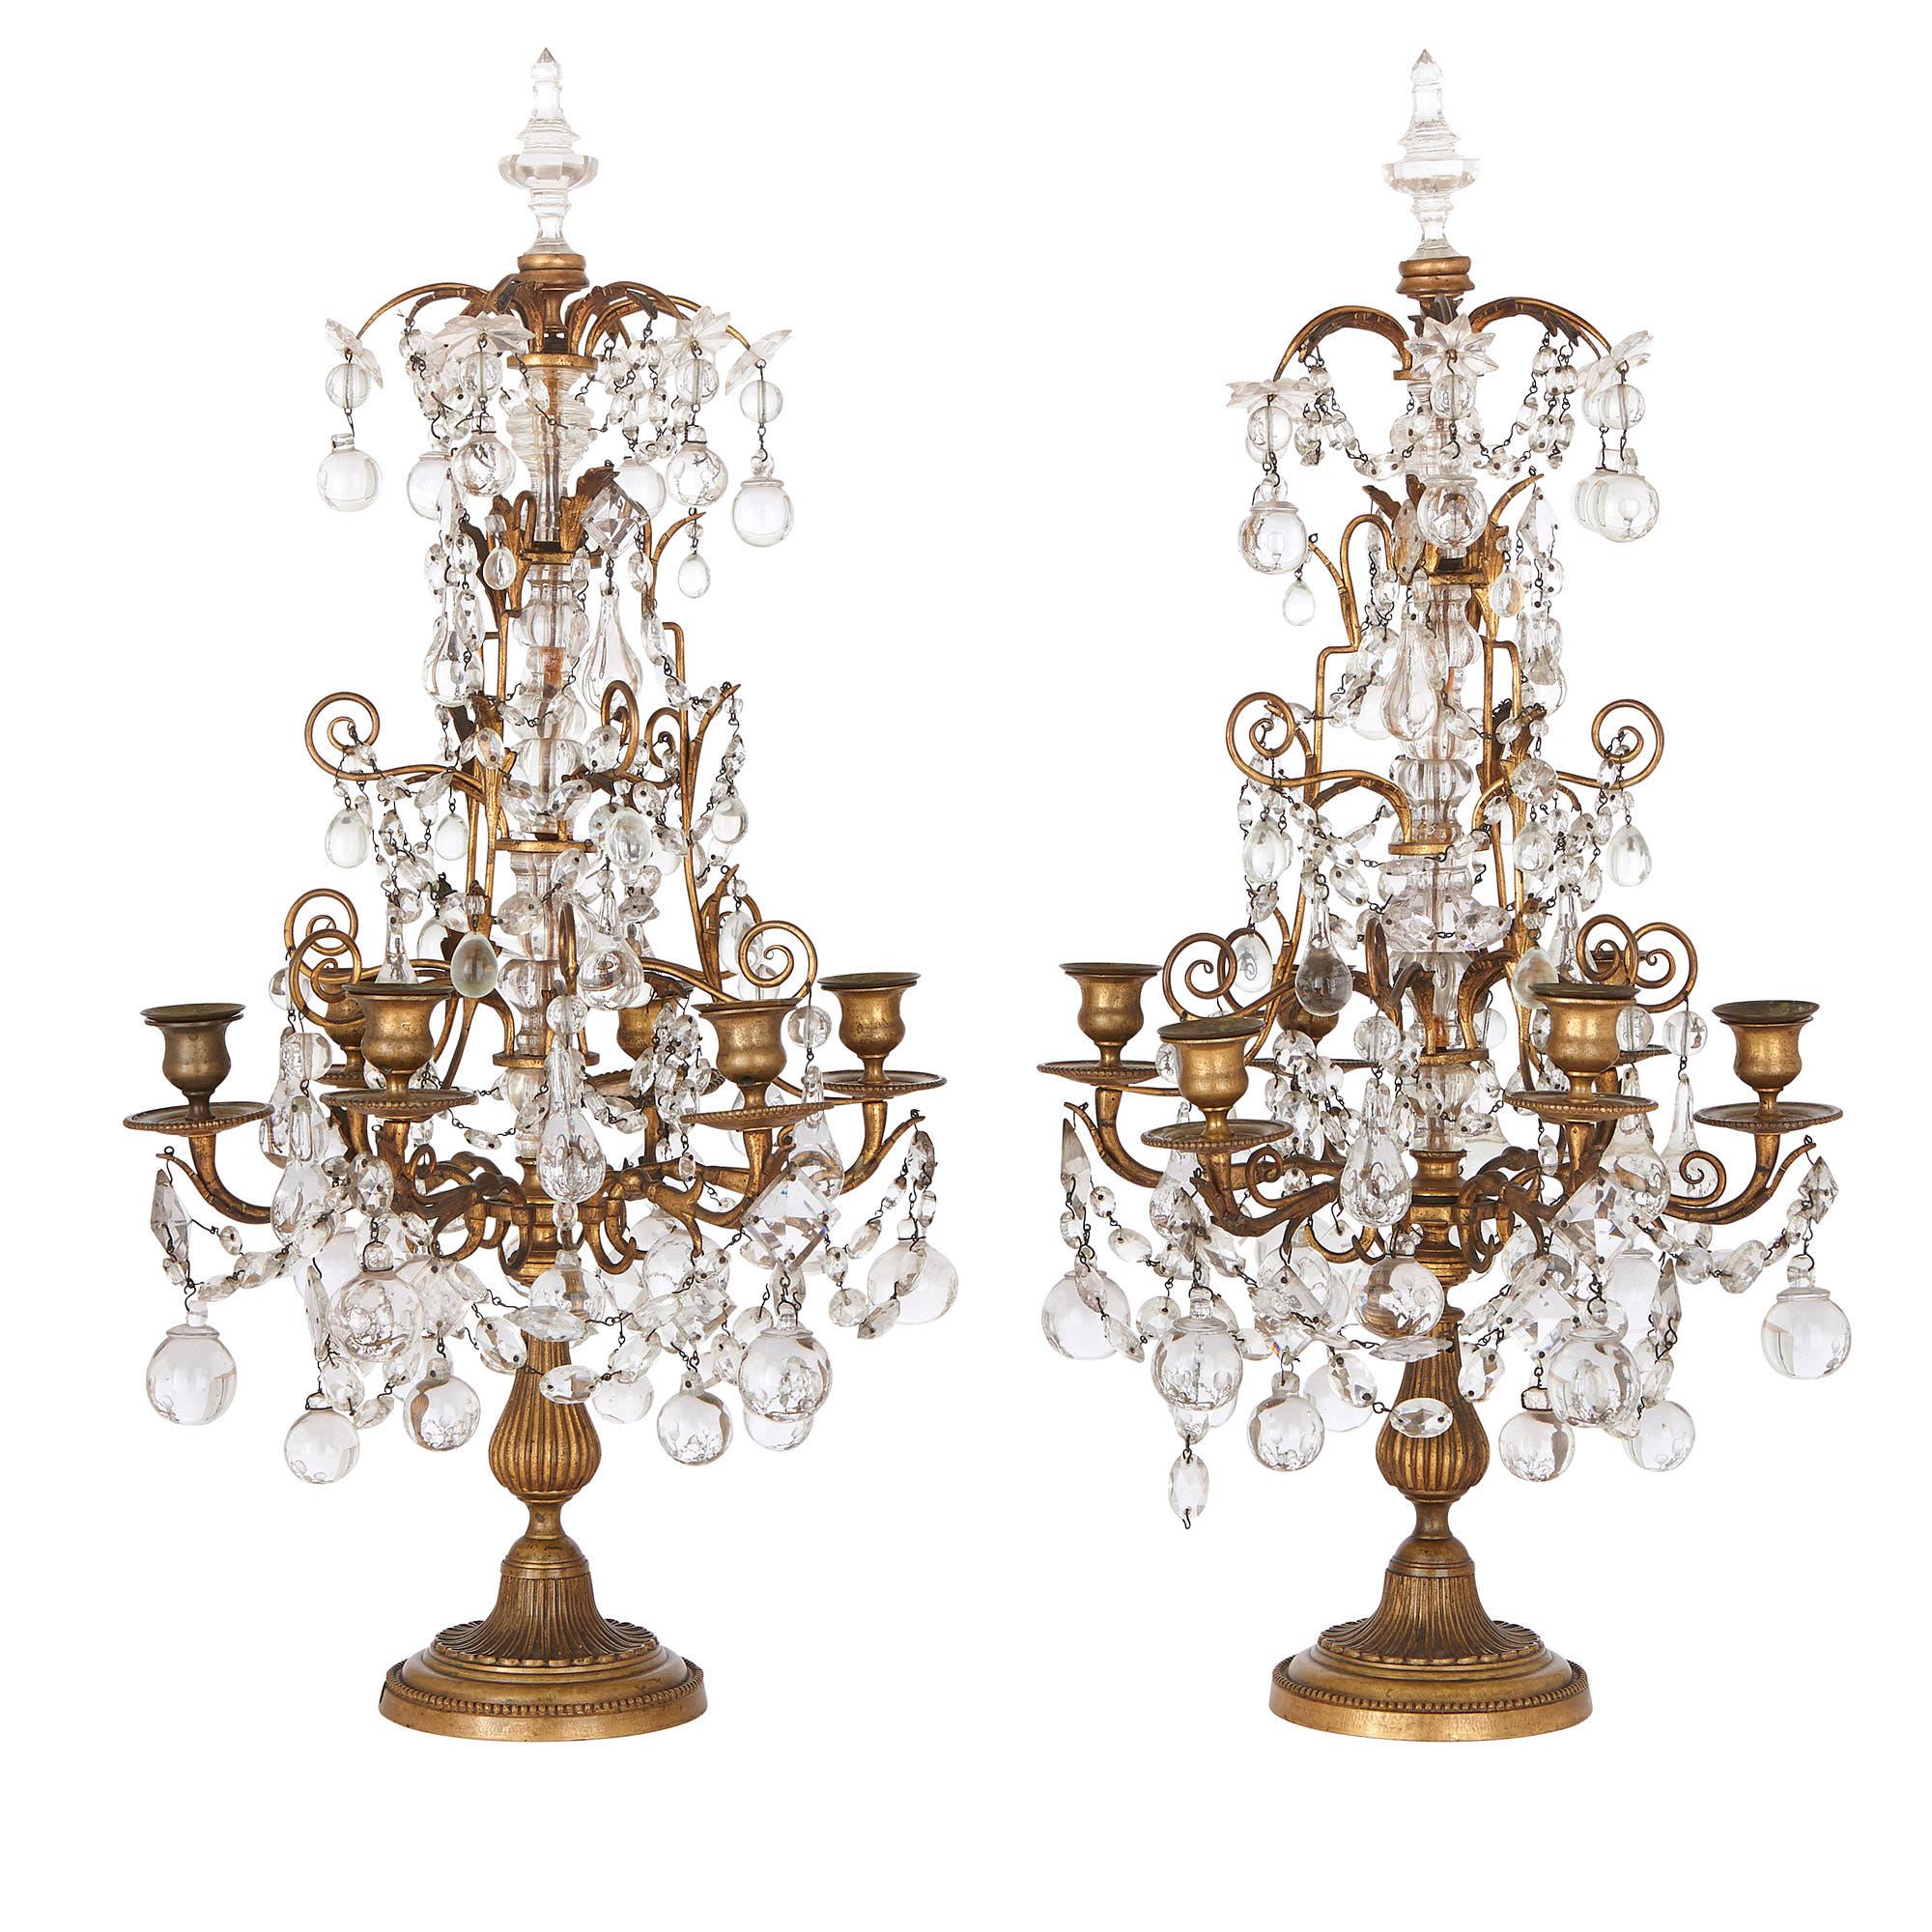 Two Neoclassical Style Gilt Bronze and Cut Glass Candelabra